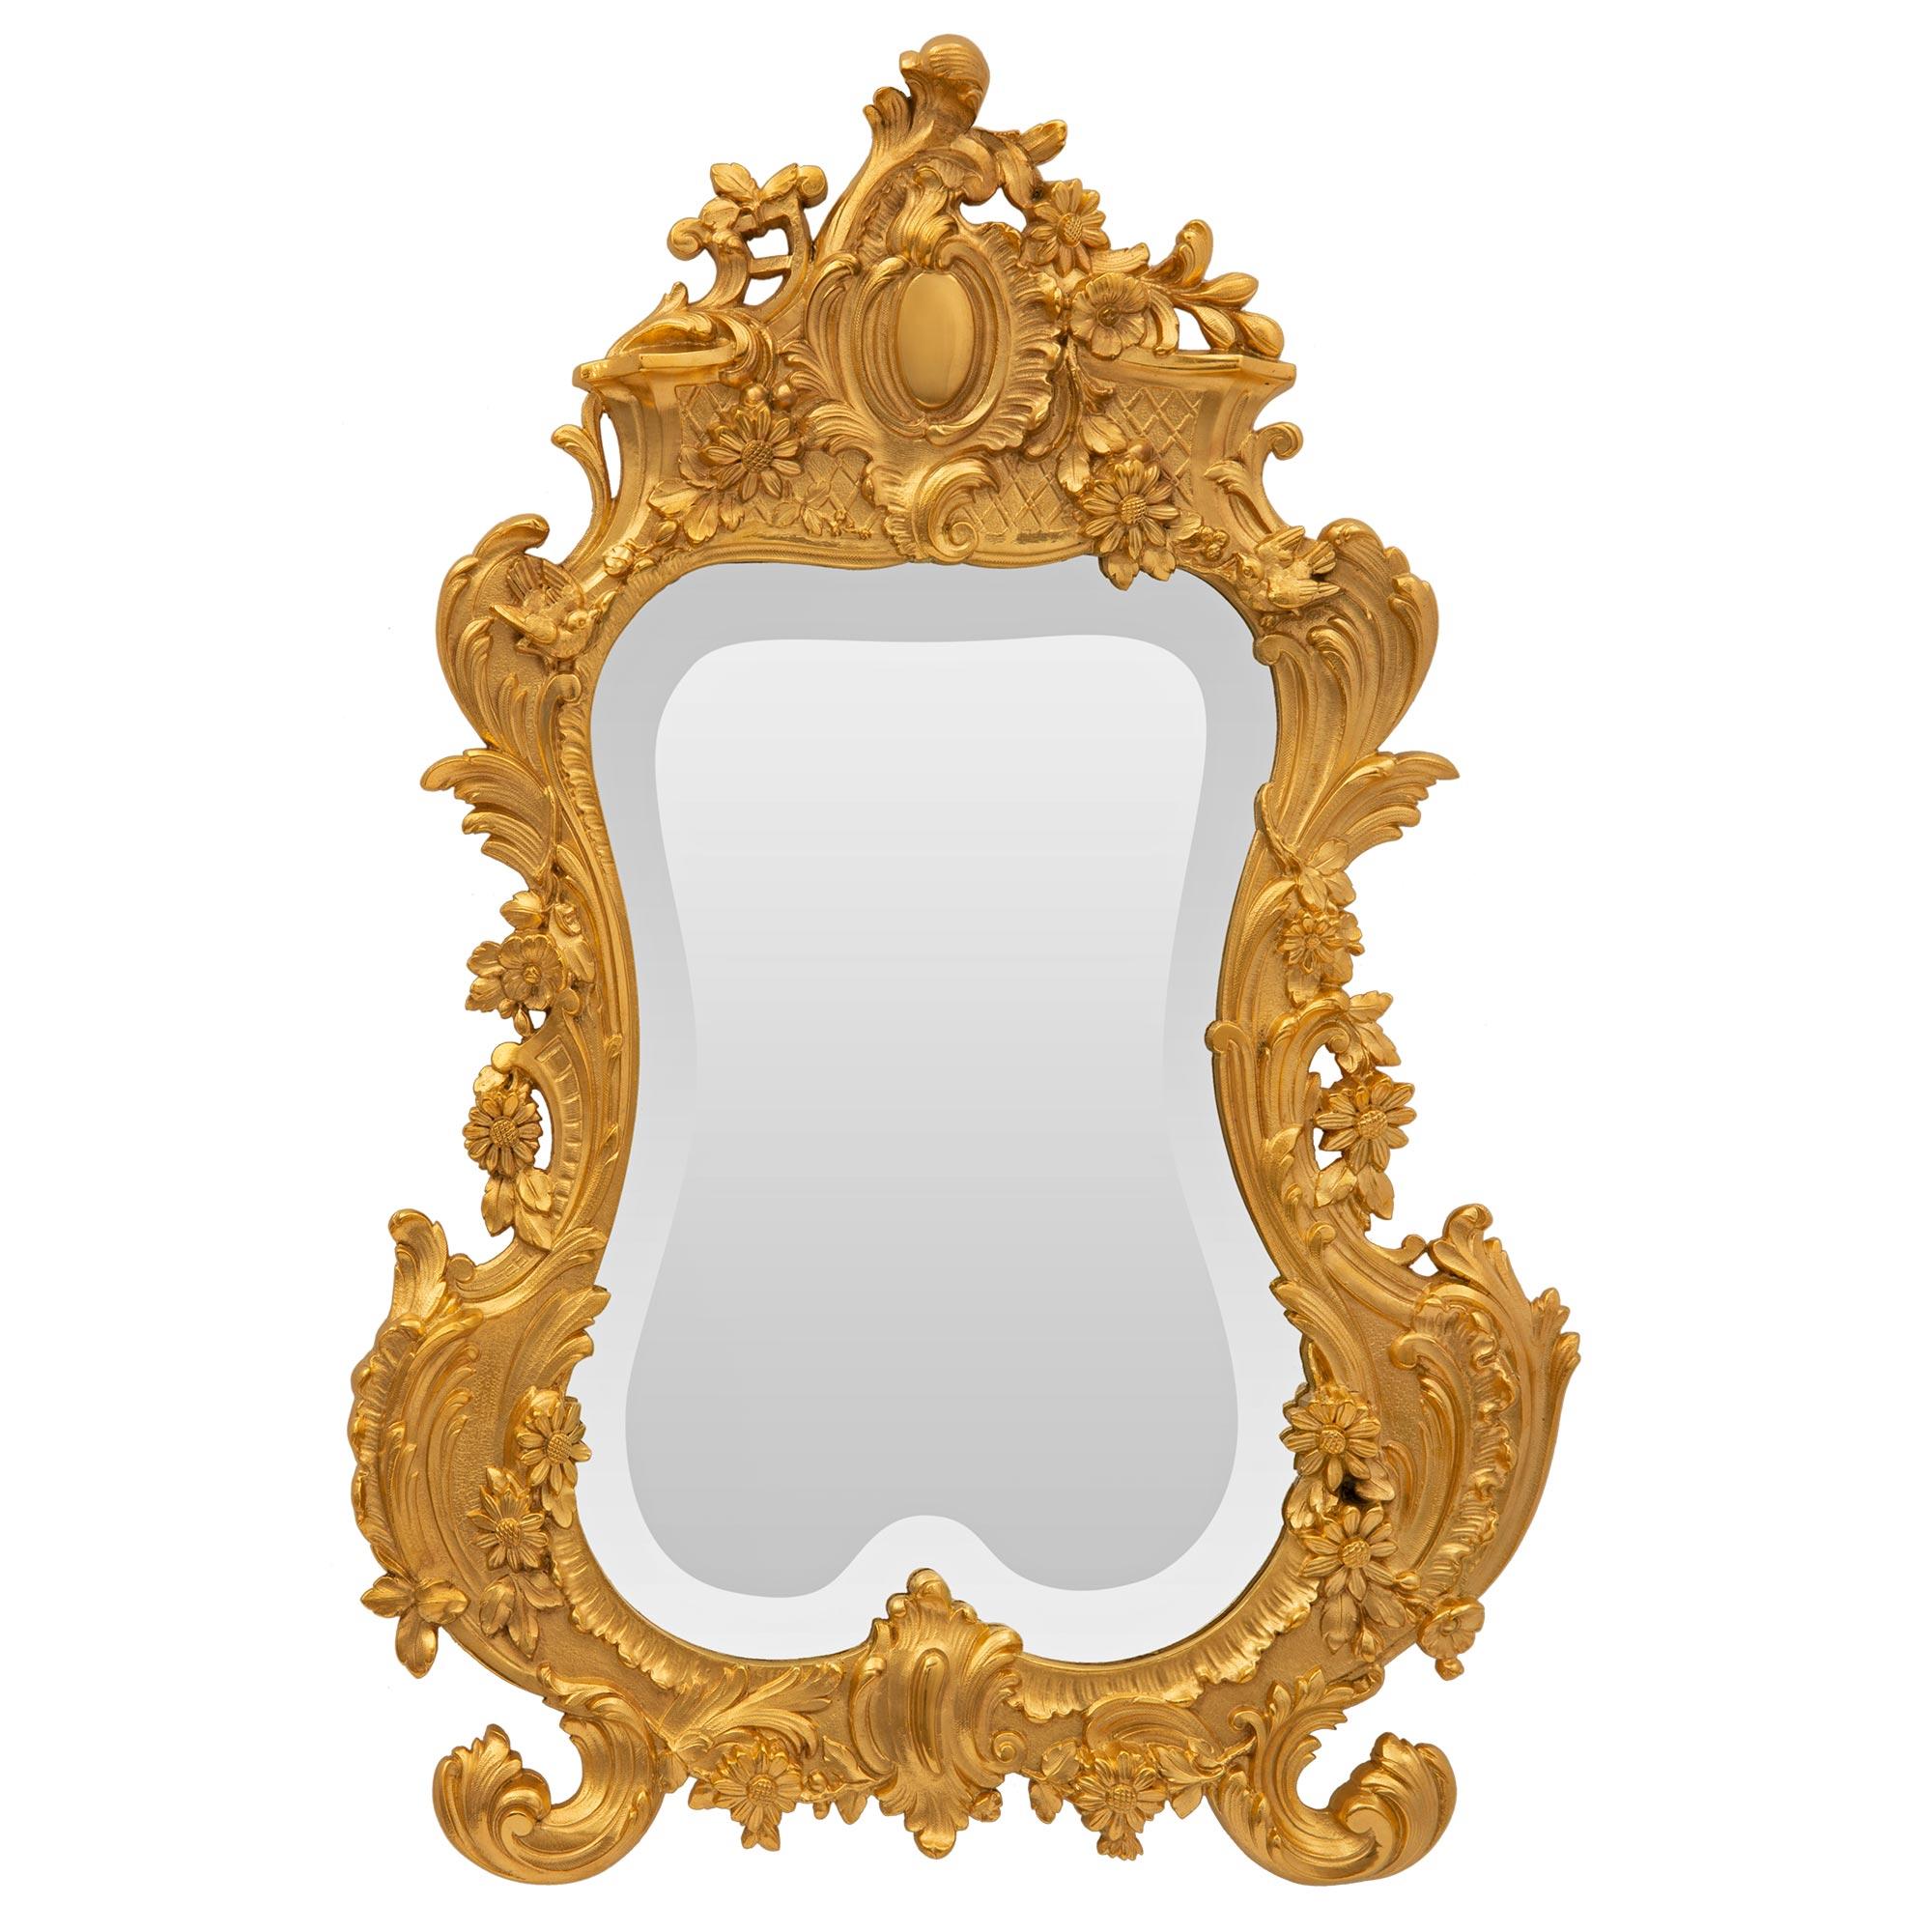 A charming and high quality French 19th century Louis XV st. ormolu vanity mirror. The small scale wall mounted mirror retains its original beautiful beveled mirror plate set within the striking ormolu frame. The frame displays a most decorative